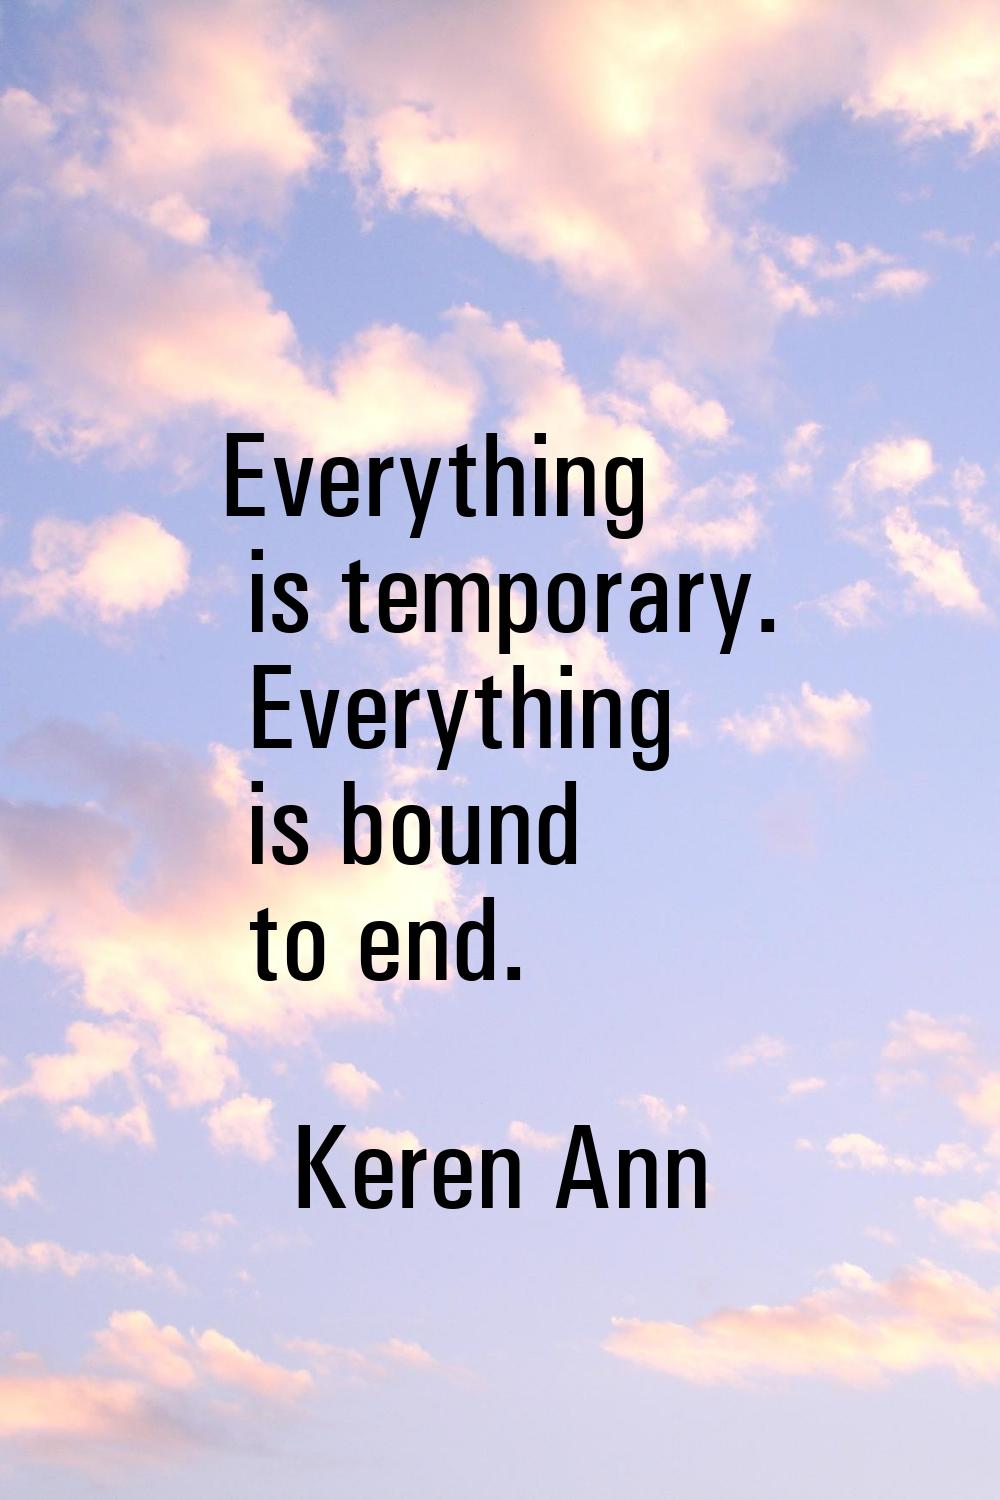 Everything is temporary. Everything is bound to end.